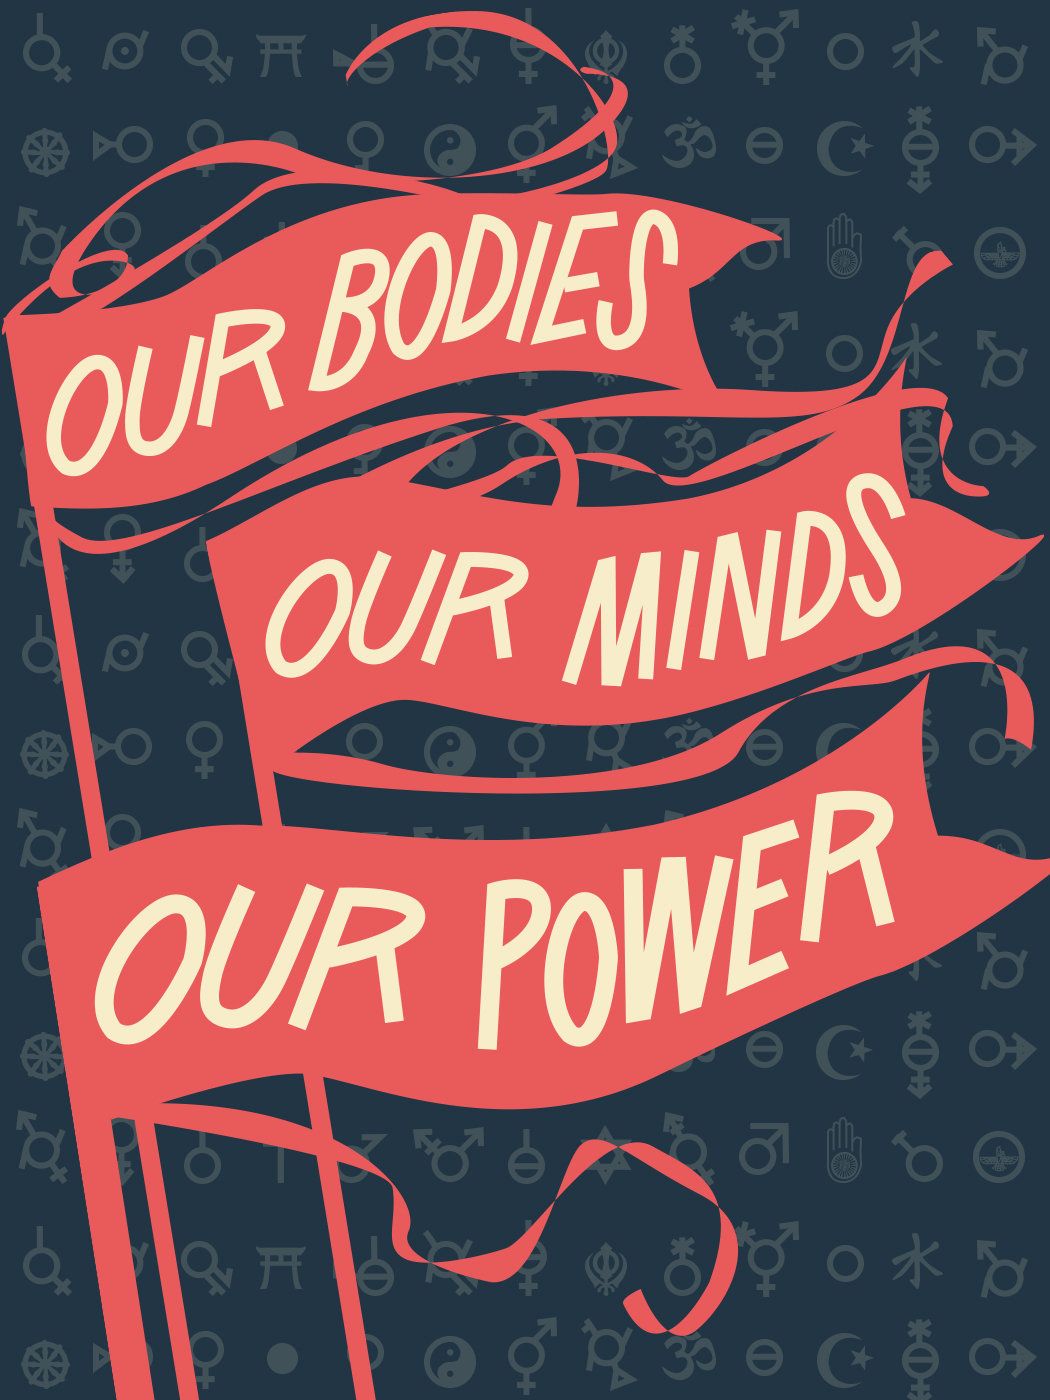 "Our Bodies, Our Minds" by Jennifer Maravillas